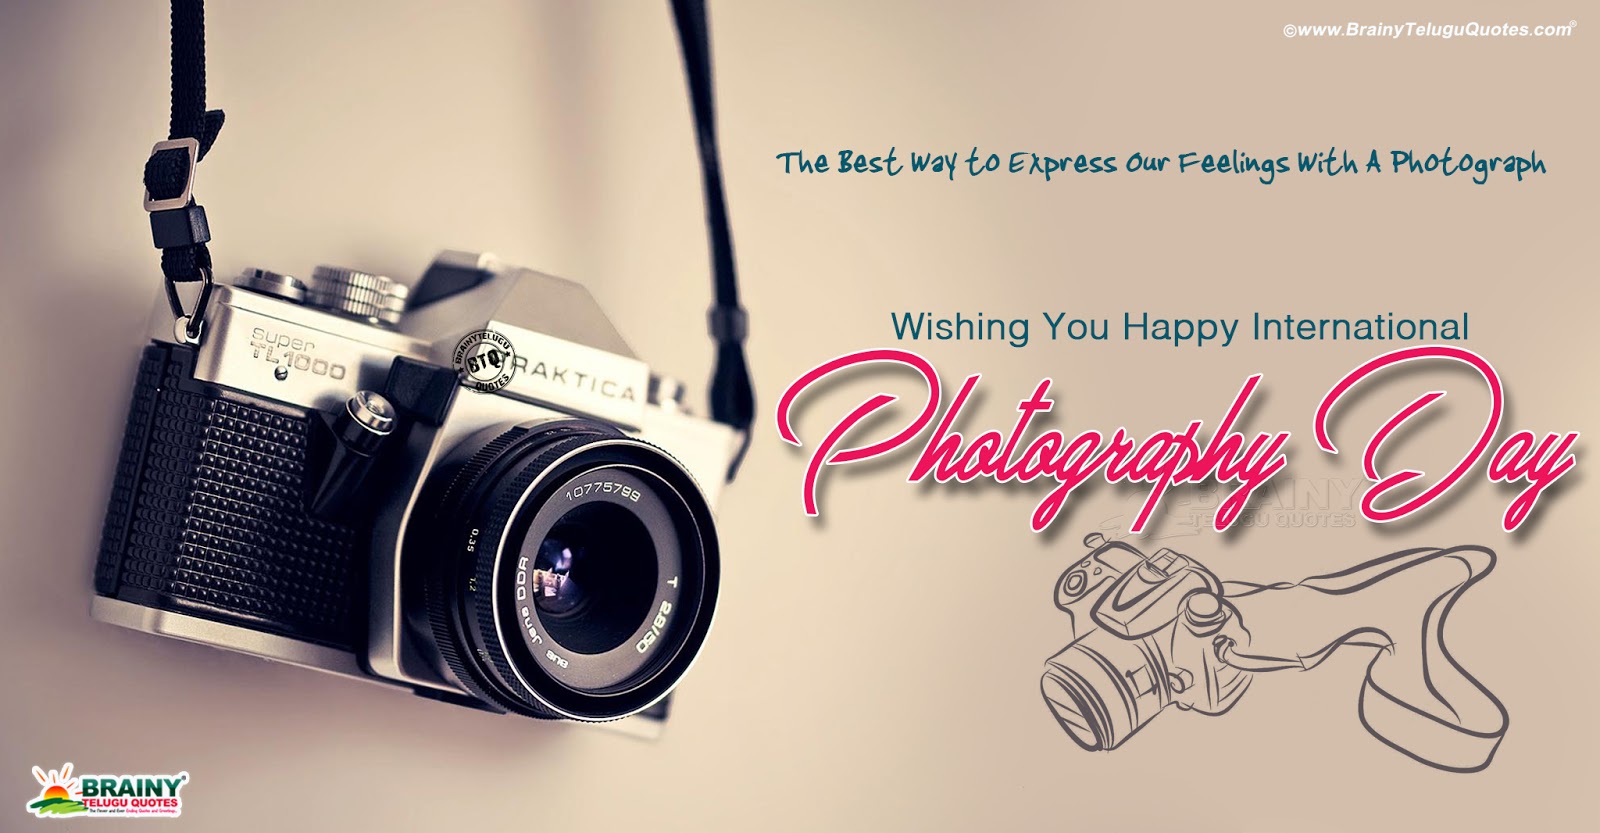 World Photography Day Greetings In English August 19th World Photography Day English Greetings. BrainyTeluguQuotes.comTelugu Quotes. English Quotes. Hindi Quotes. Tamil Quotes. Greetings